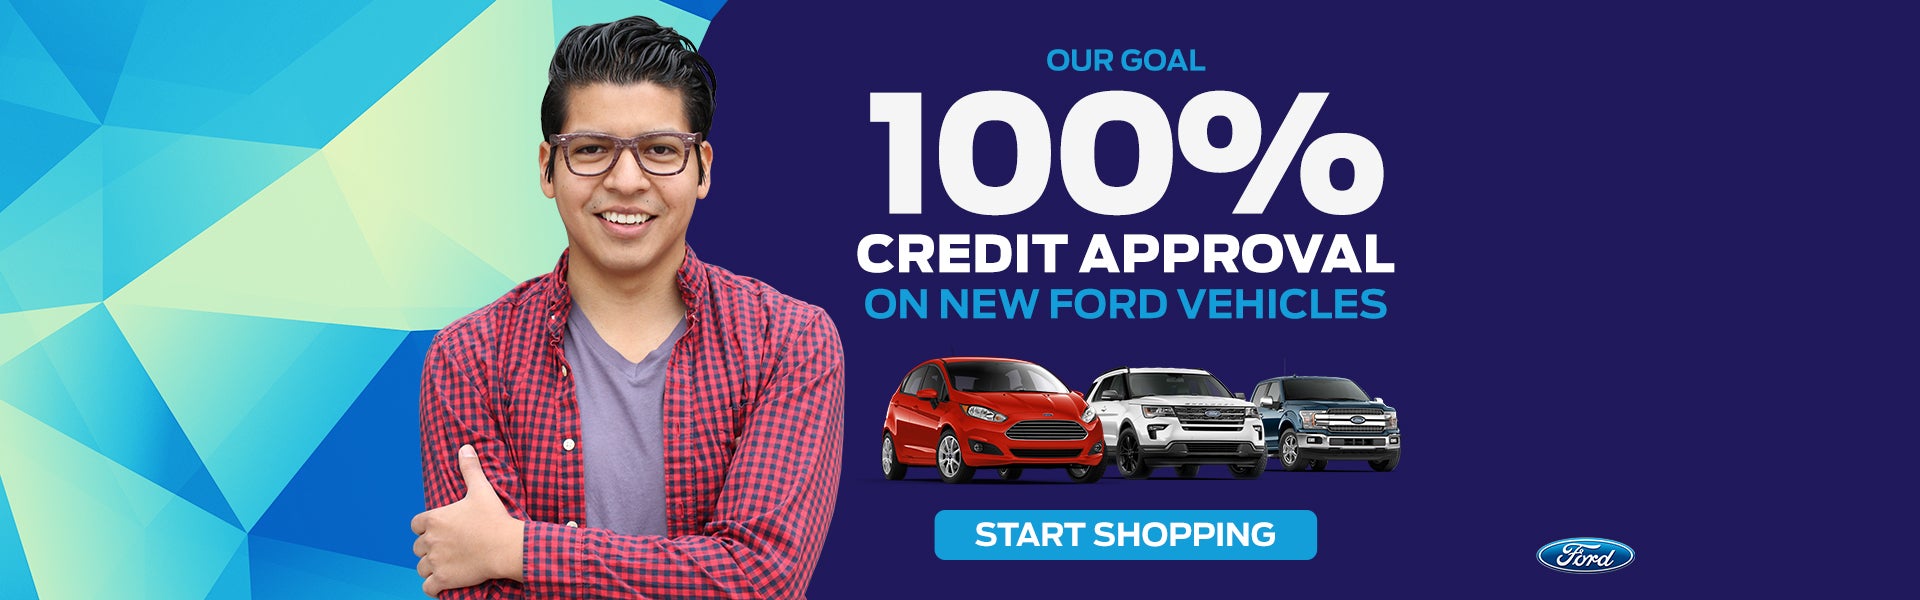 Our Goal: Credit Approval